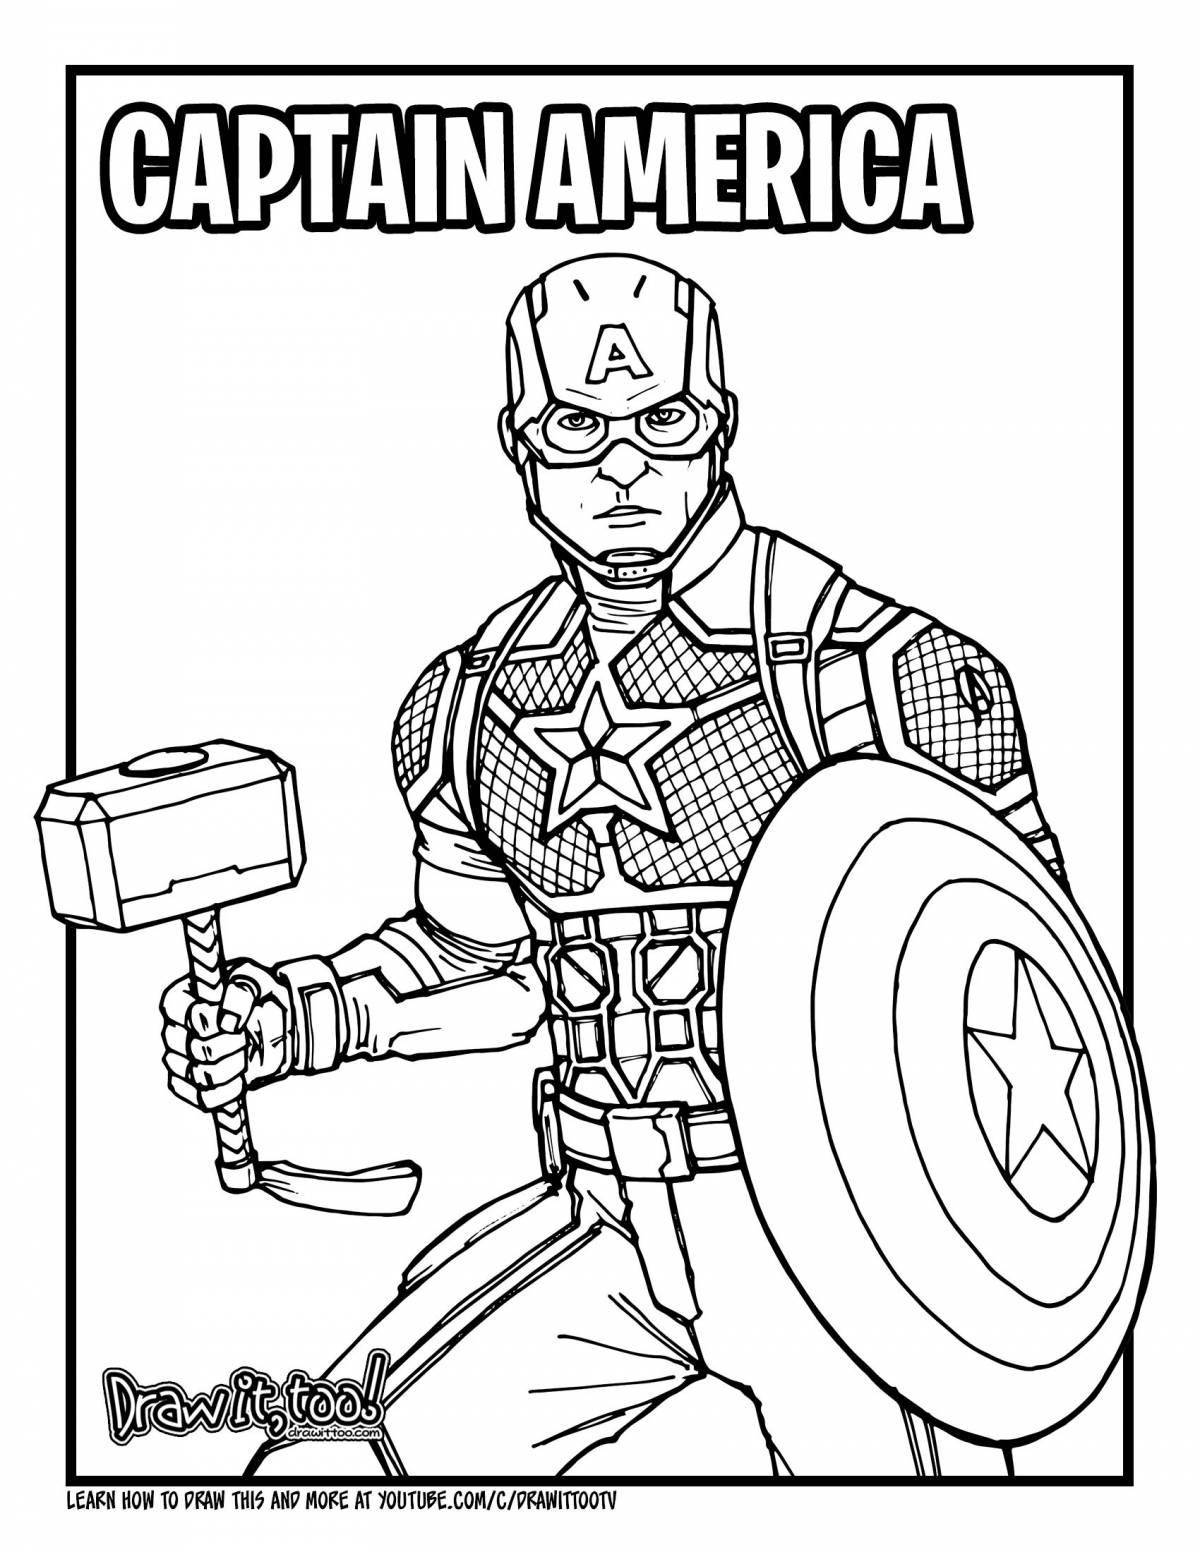 Captain America's intriguing zombie coloring page